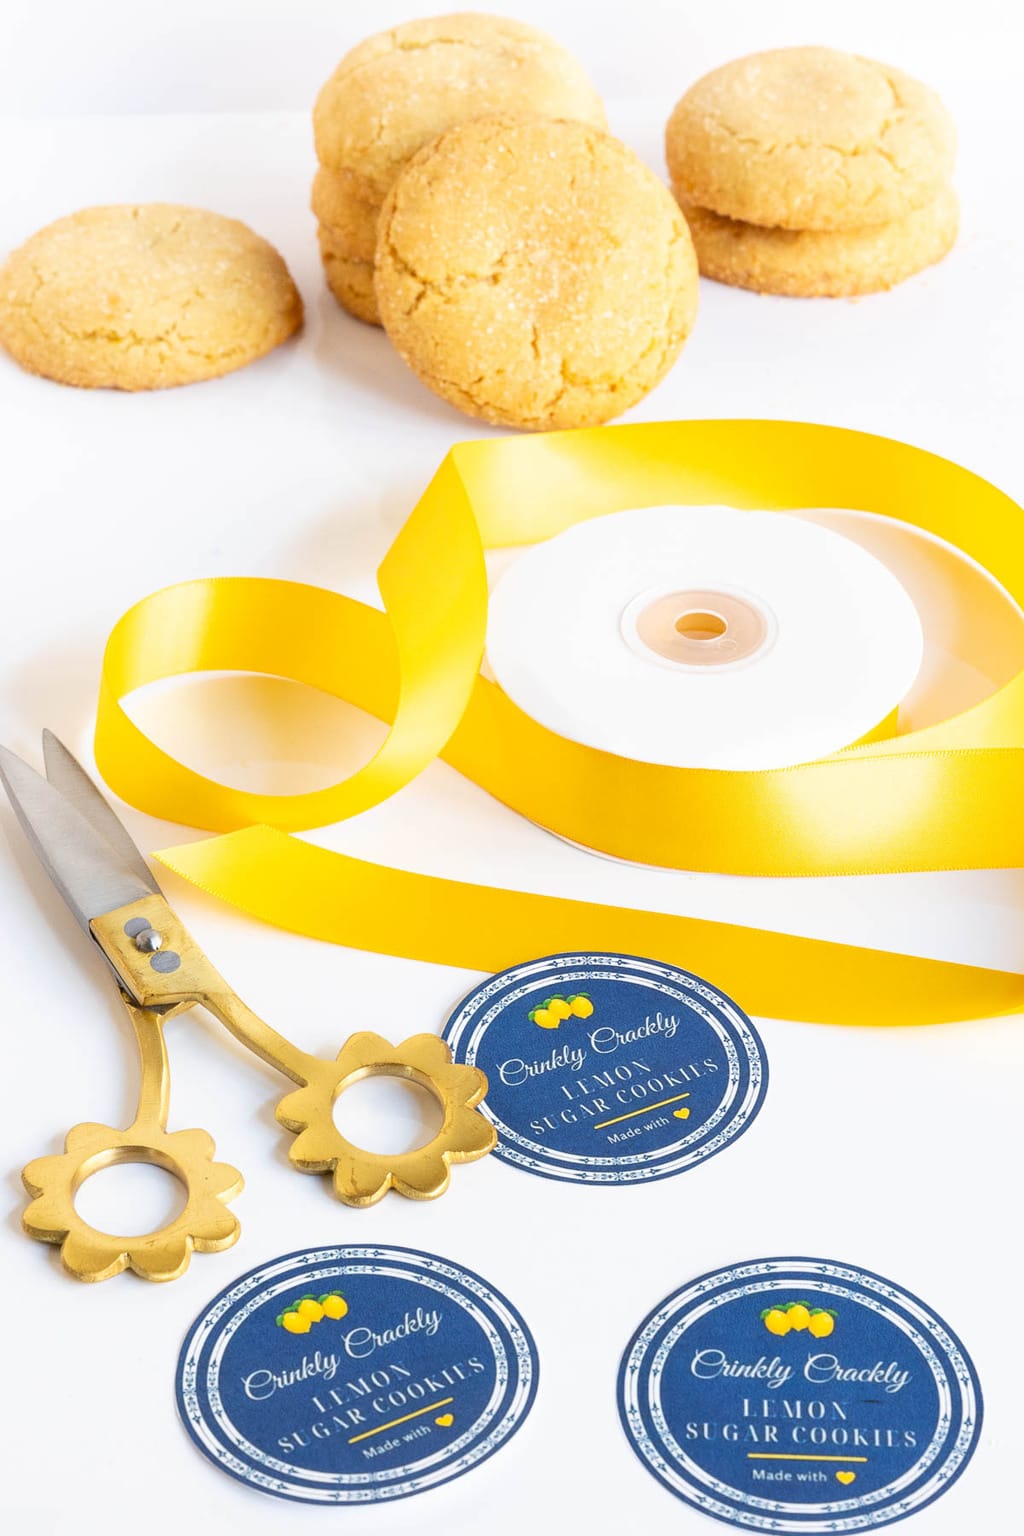 Vertical photo of Crinkly Crackly Lemon Sugar Cookie custom labels for gift giving.